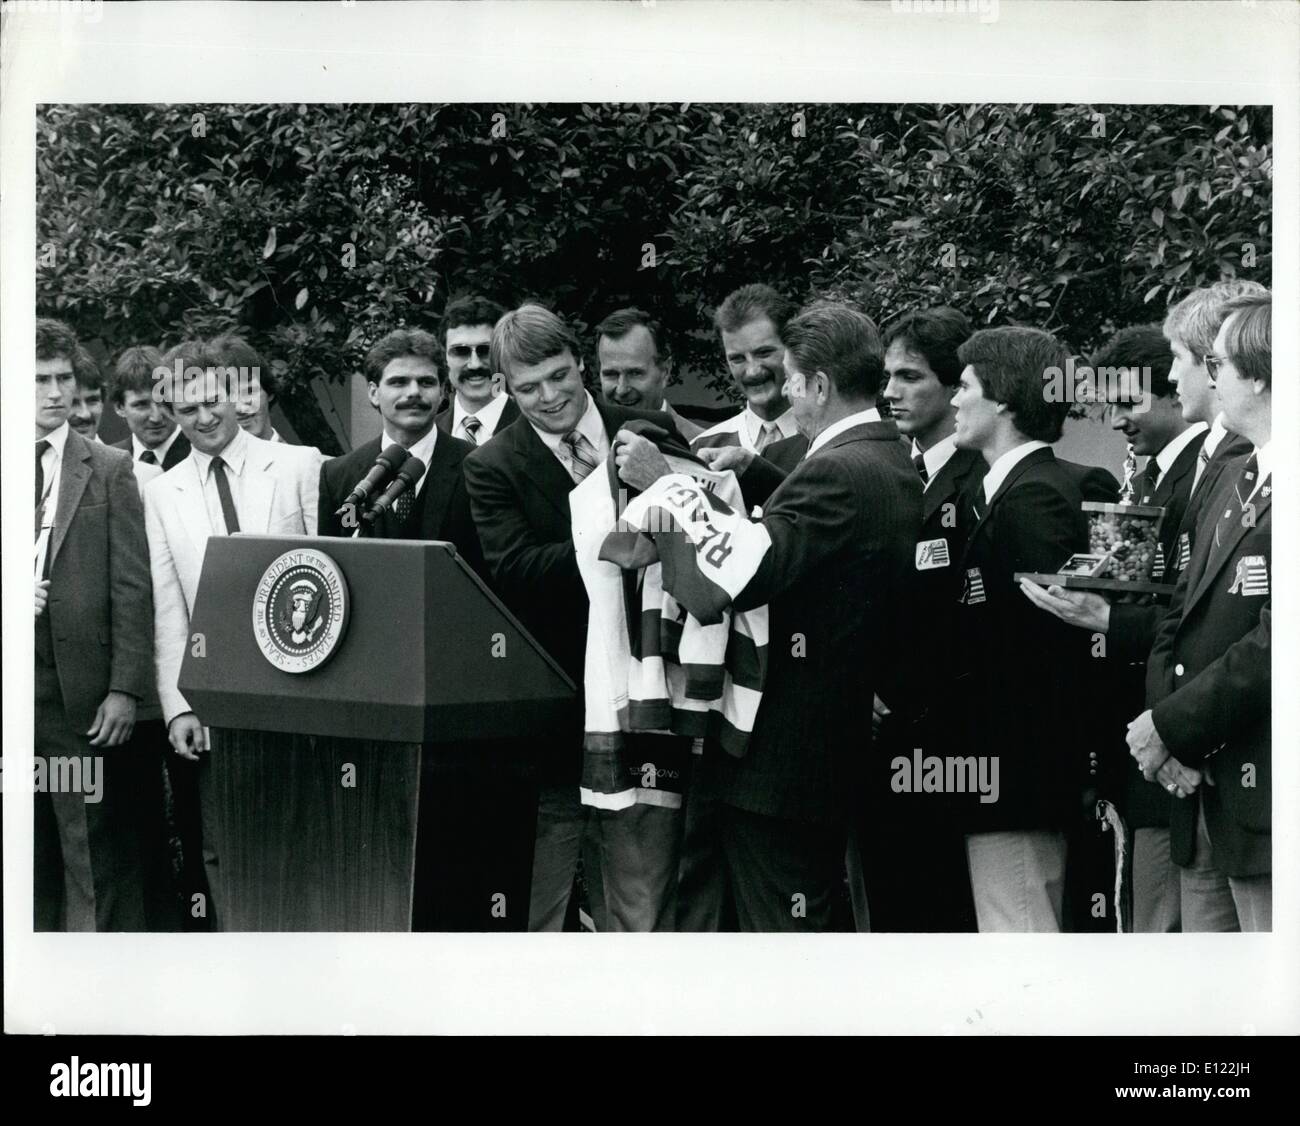 Sep. 09, 1983 - The U.S. Olympic Hockey team presents a team jersey to President Reagan. The team also gave the President a trophy filed with Jelly Beans. Stock Photo